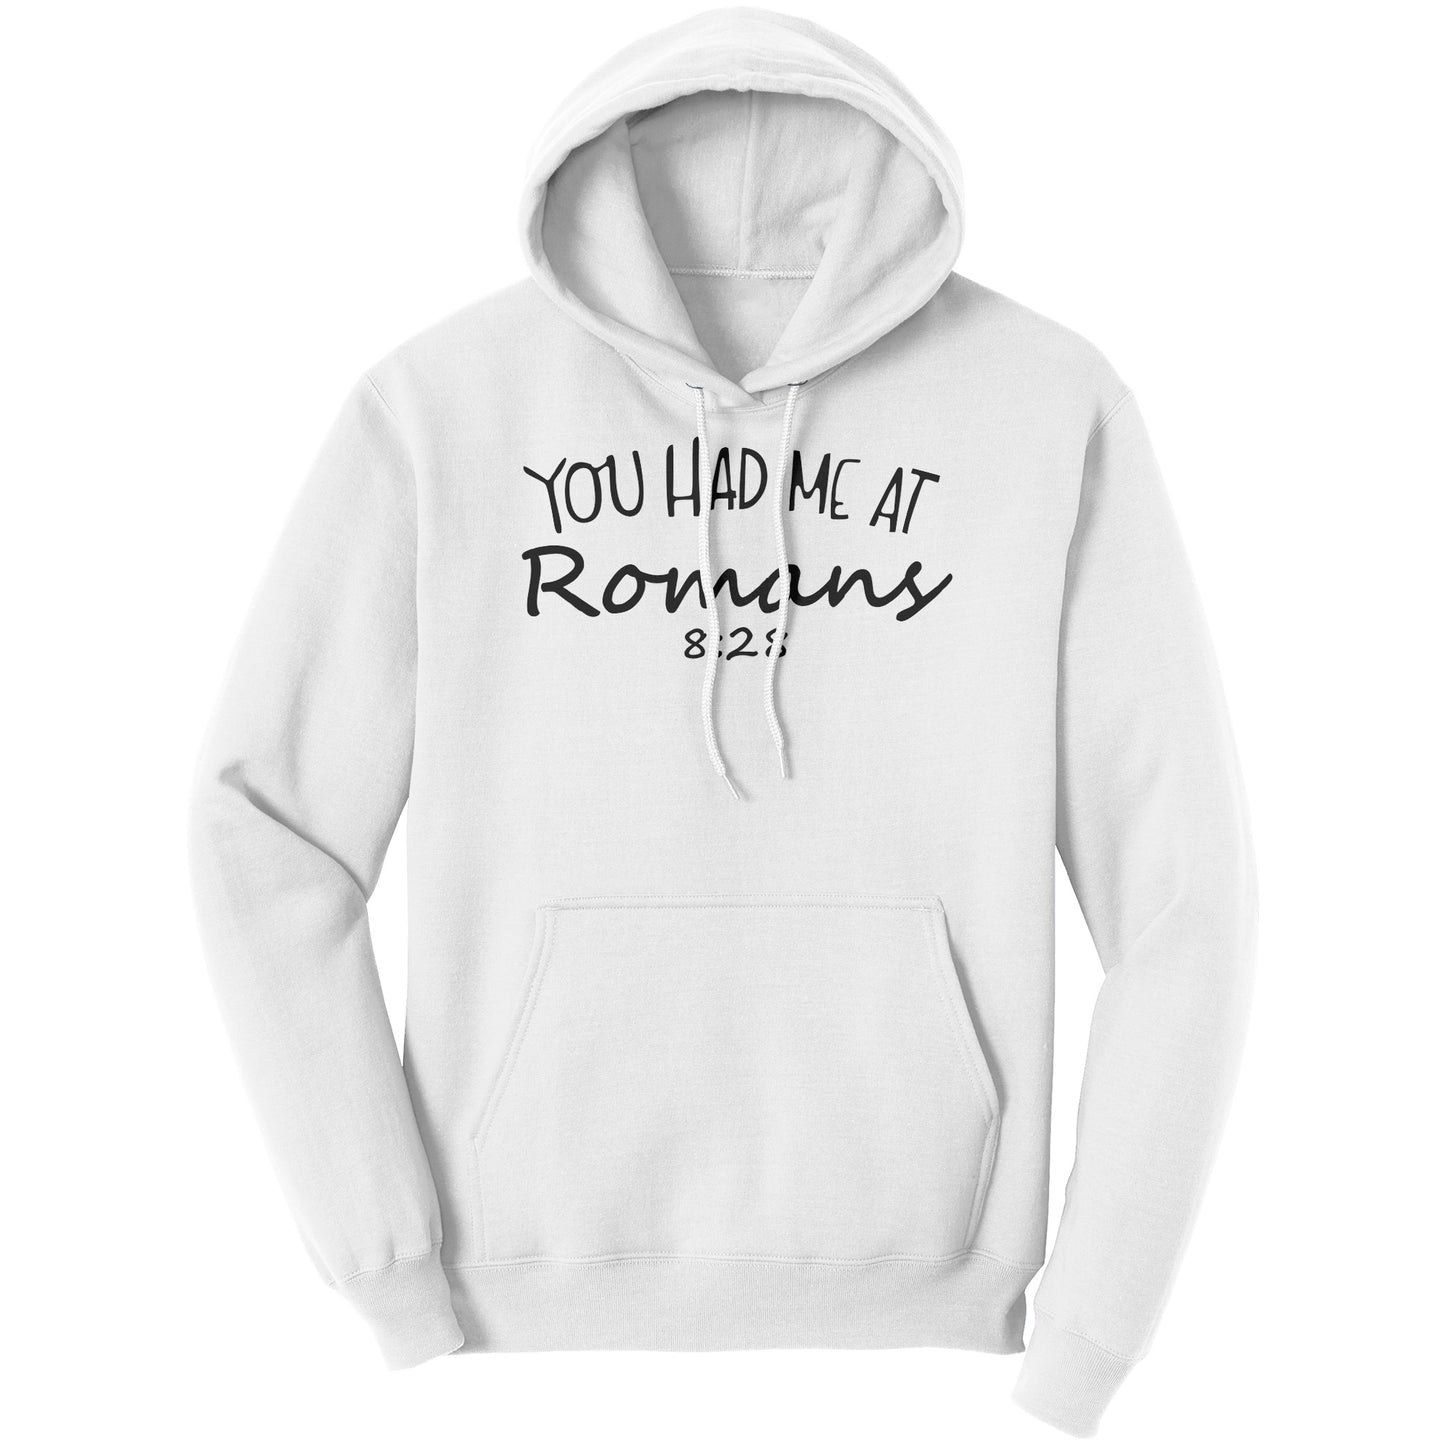 You Had me At Romans 8:28 Hoodie Part 1